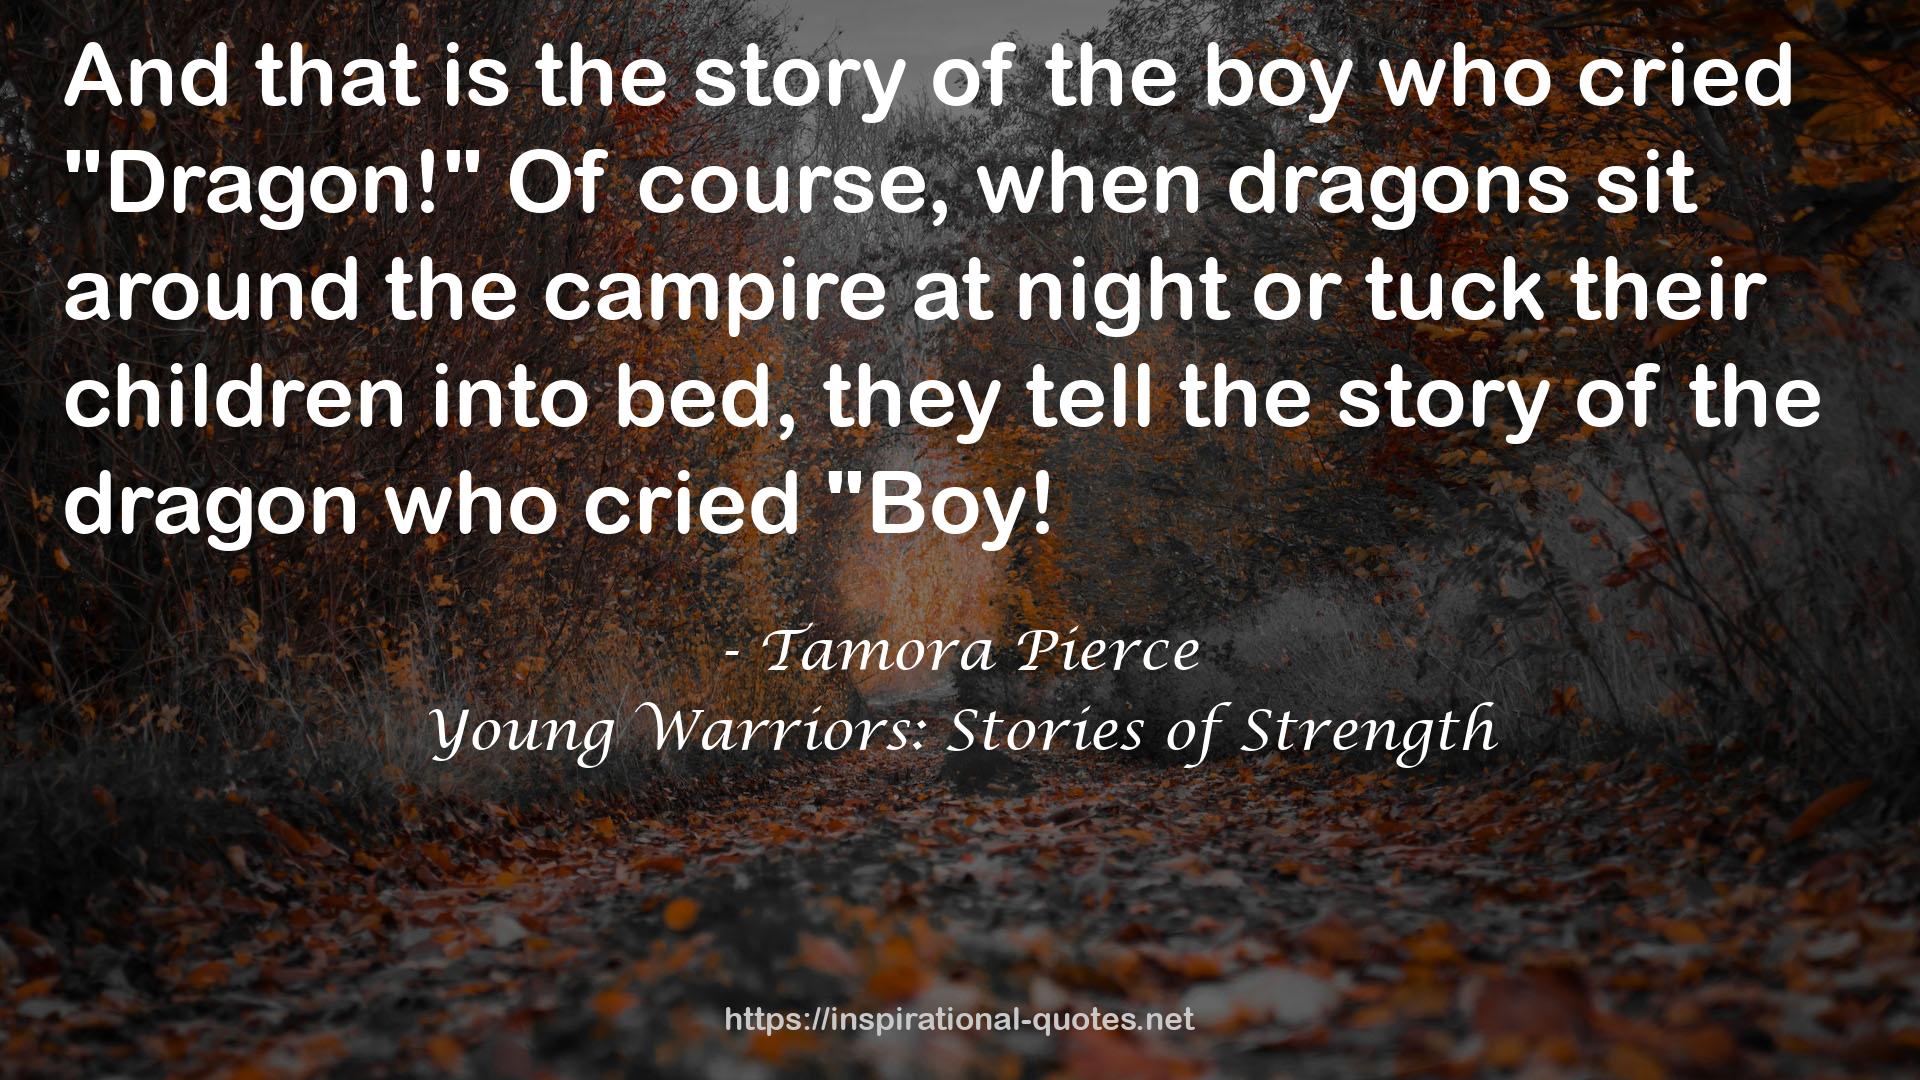 Young Warriors: Stories of Strength QUOTES